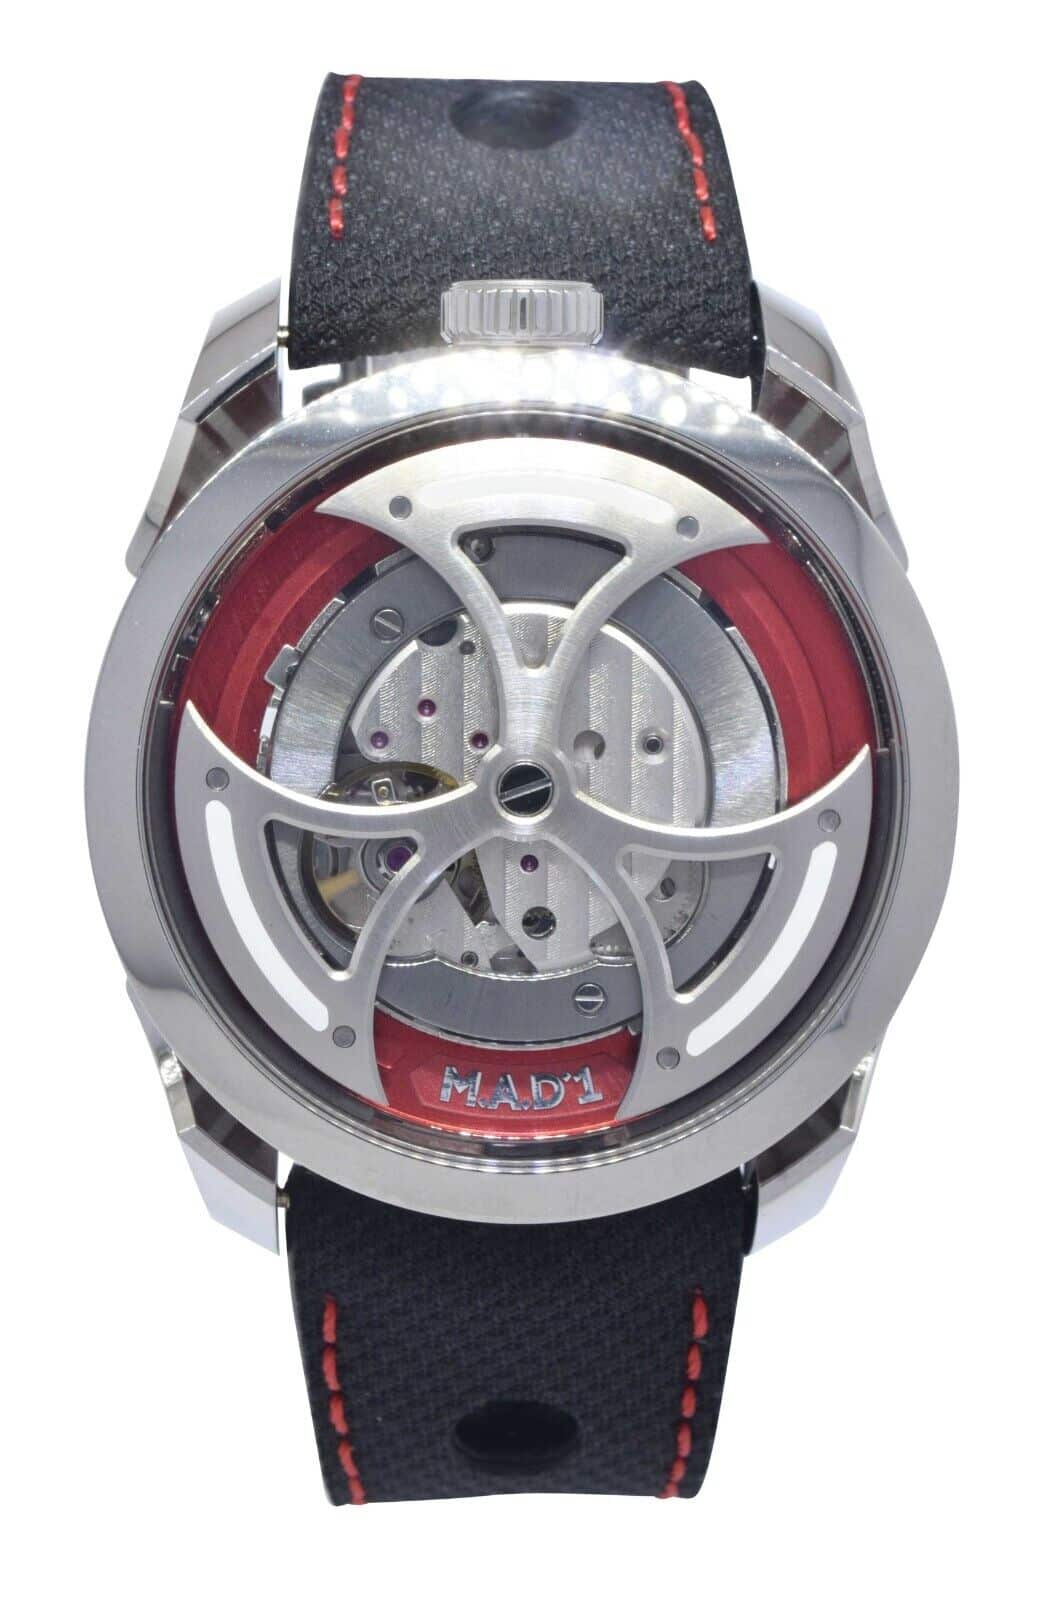 M.A.D. 1 RED by MB&F Steel Mens 42mm Automatic Watch B/P '21 MAD 1 EDITION